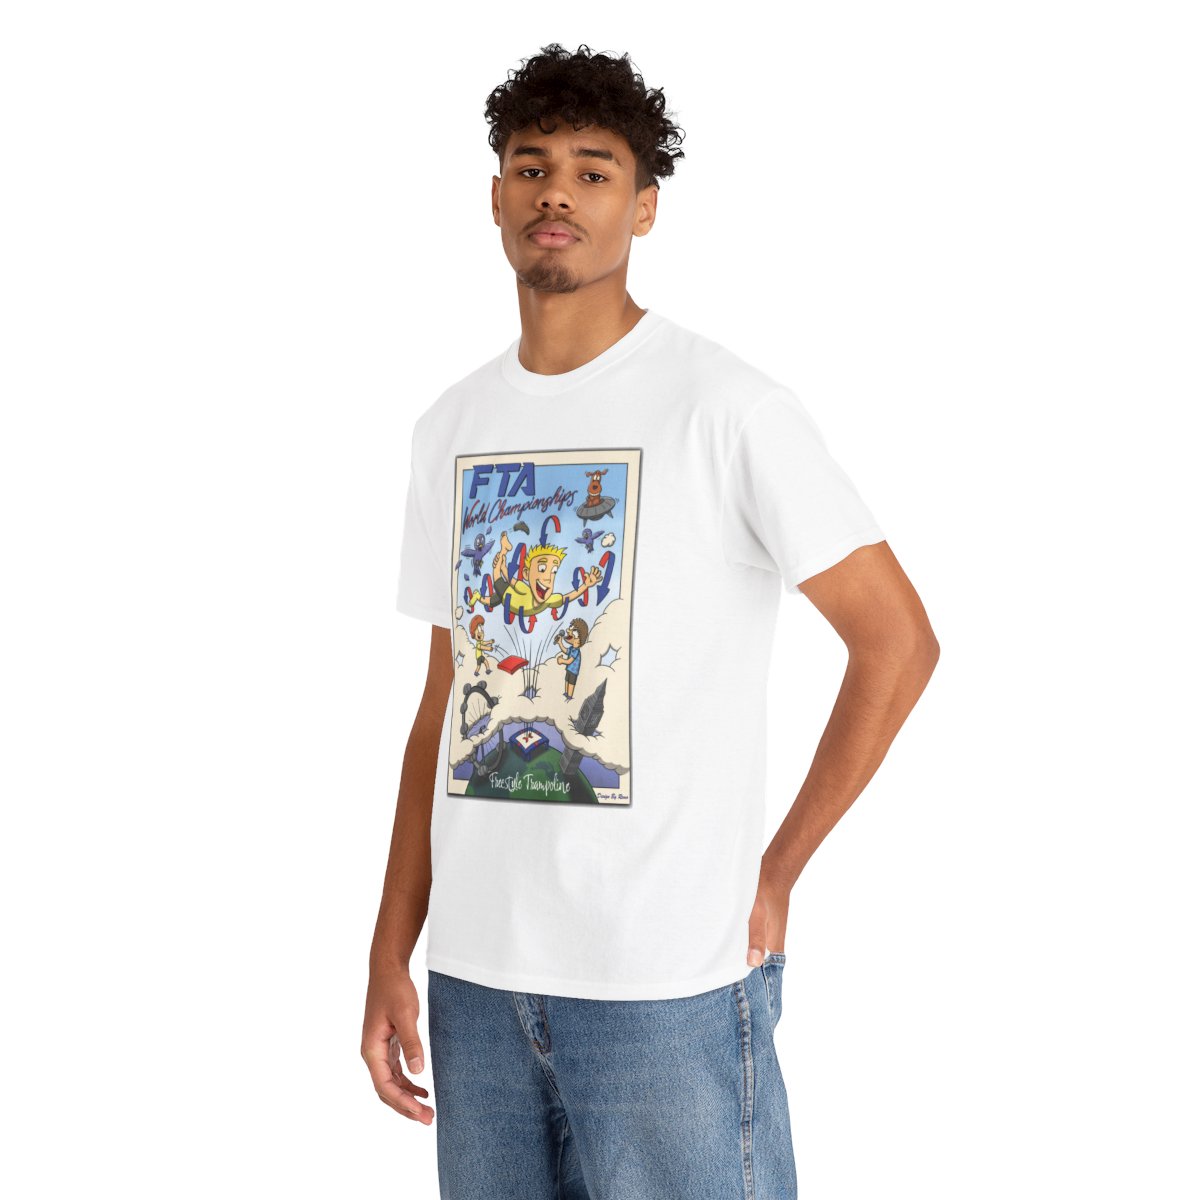 World Champs Cartoon Tee by Remo product main image